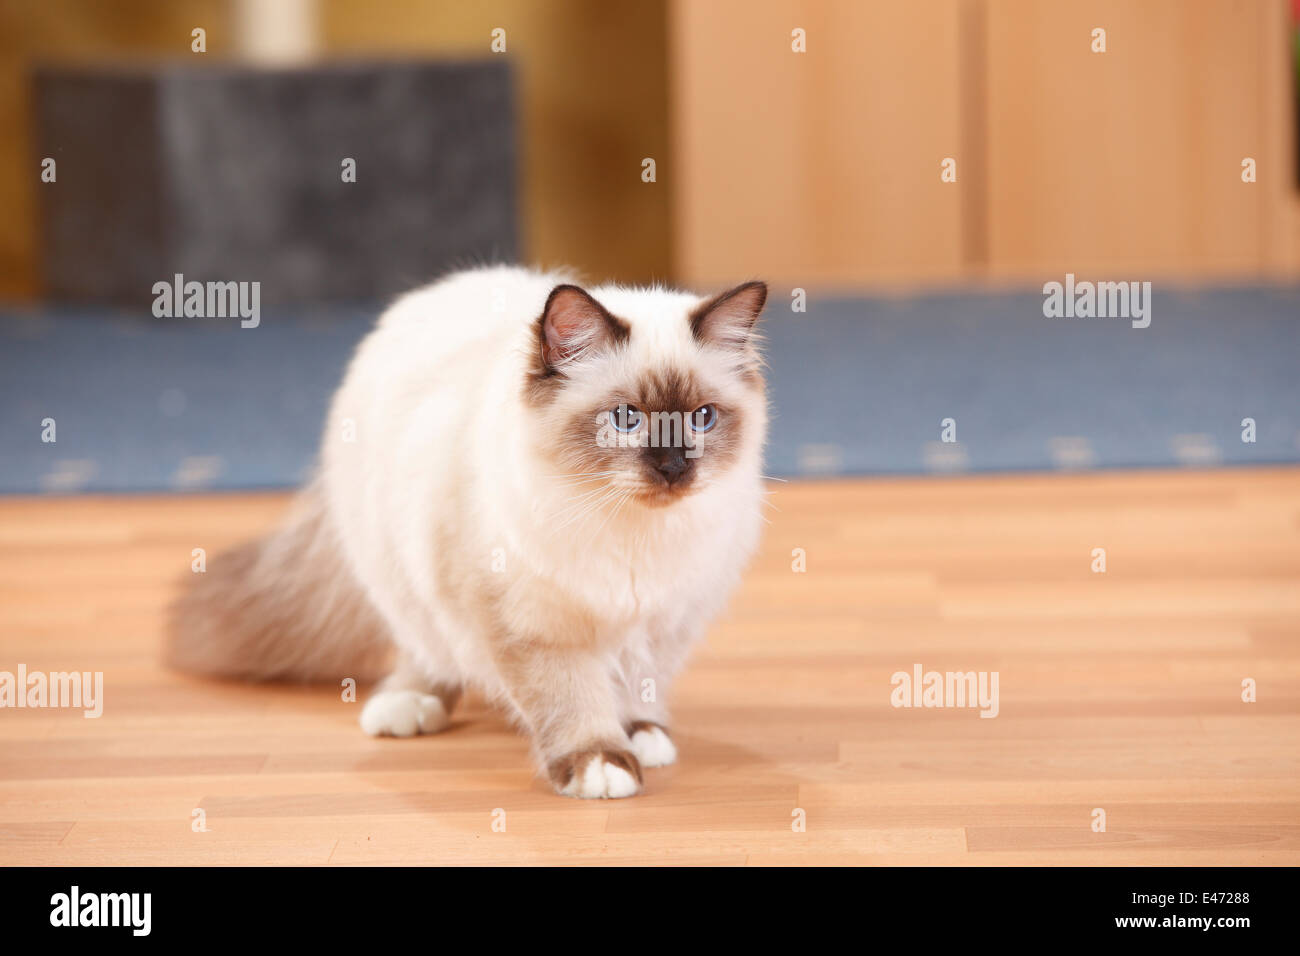 Sacred Cat of Birma, tomcat, seal-point, 6 months |Birmakatze, Kater, seal-point, 6 Monate Stock Photo